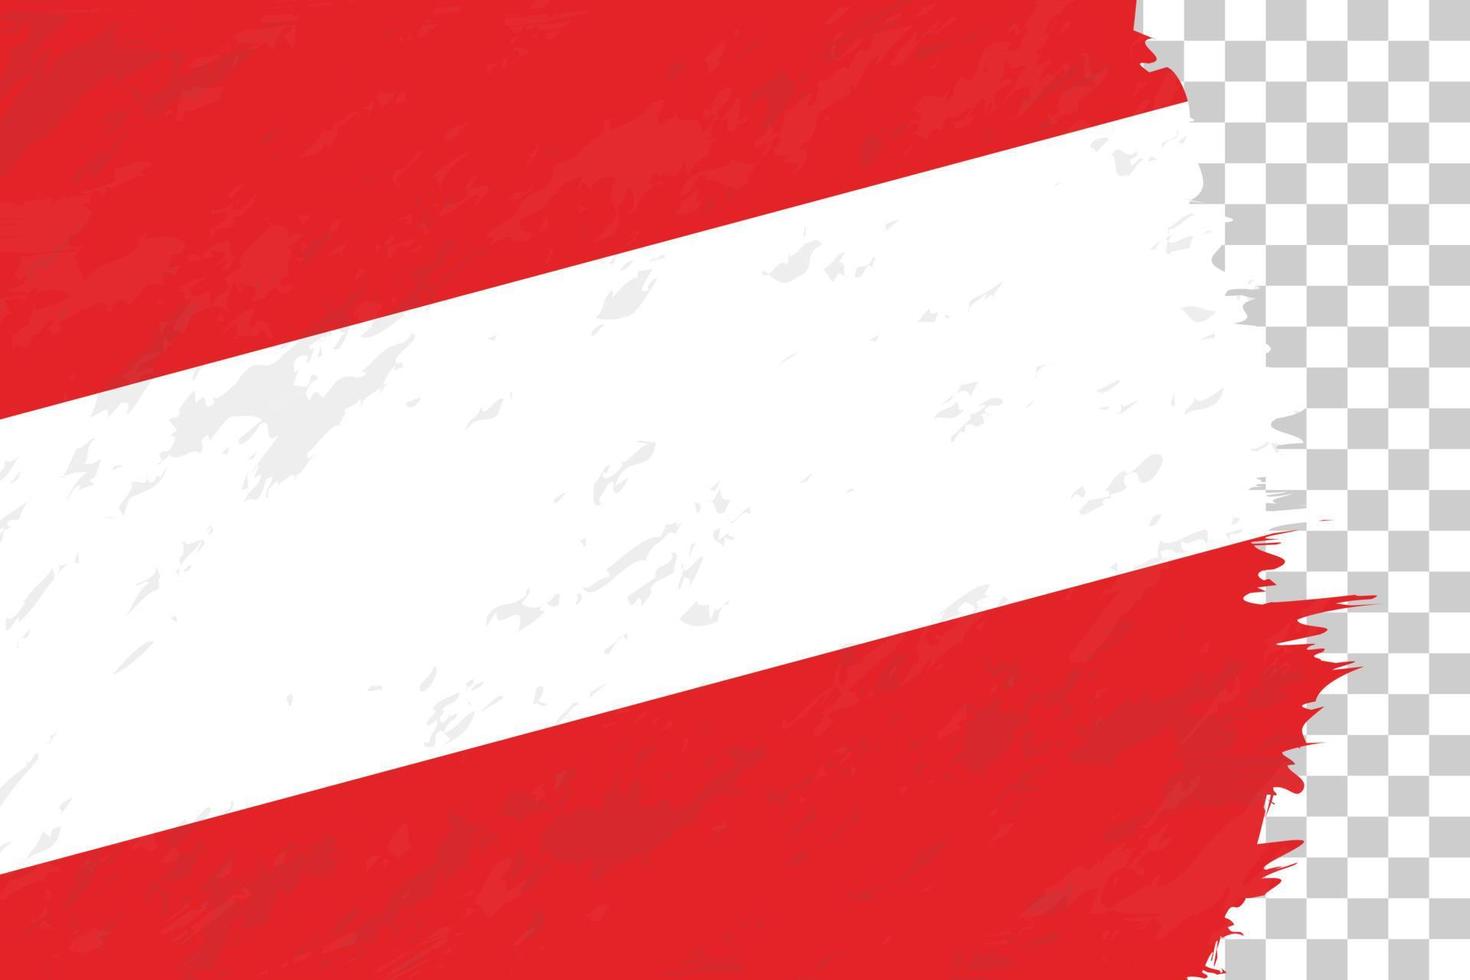 Horizontal Abstract Grunge Brushed Flag of Austria on Transparent Grid. vector